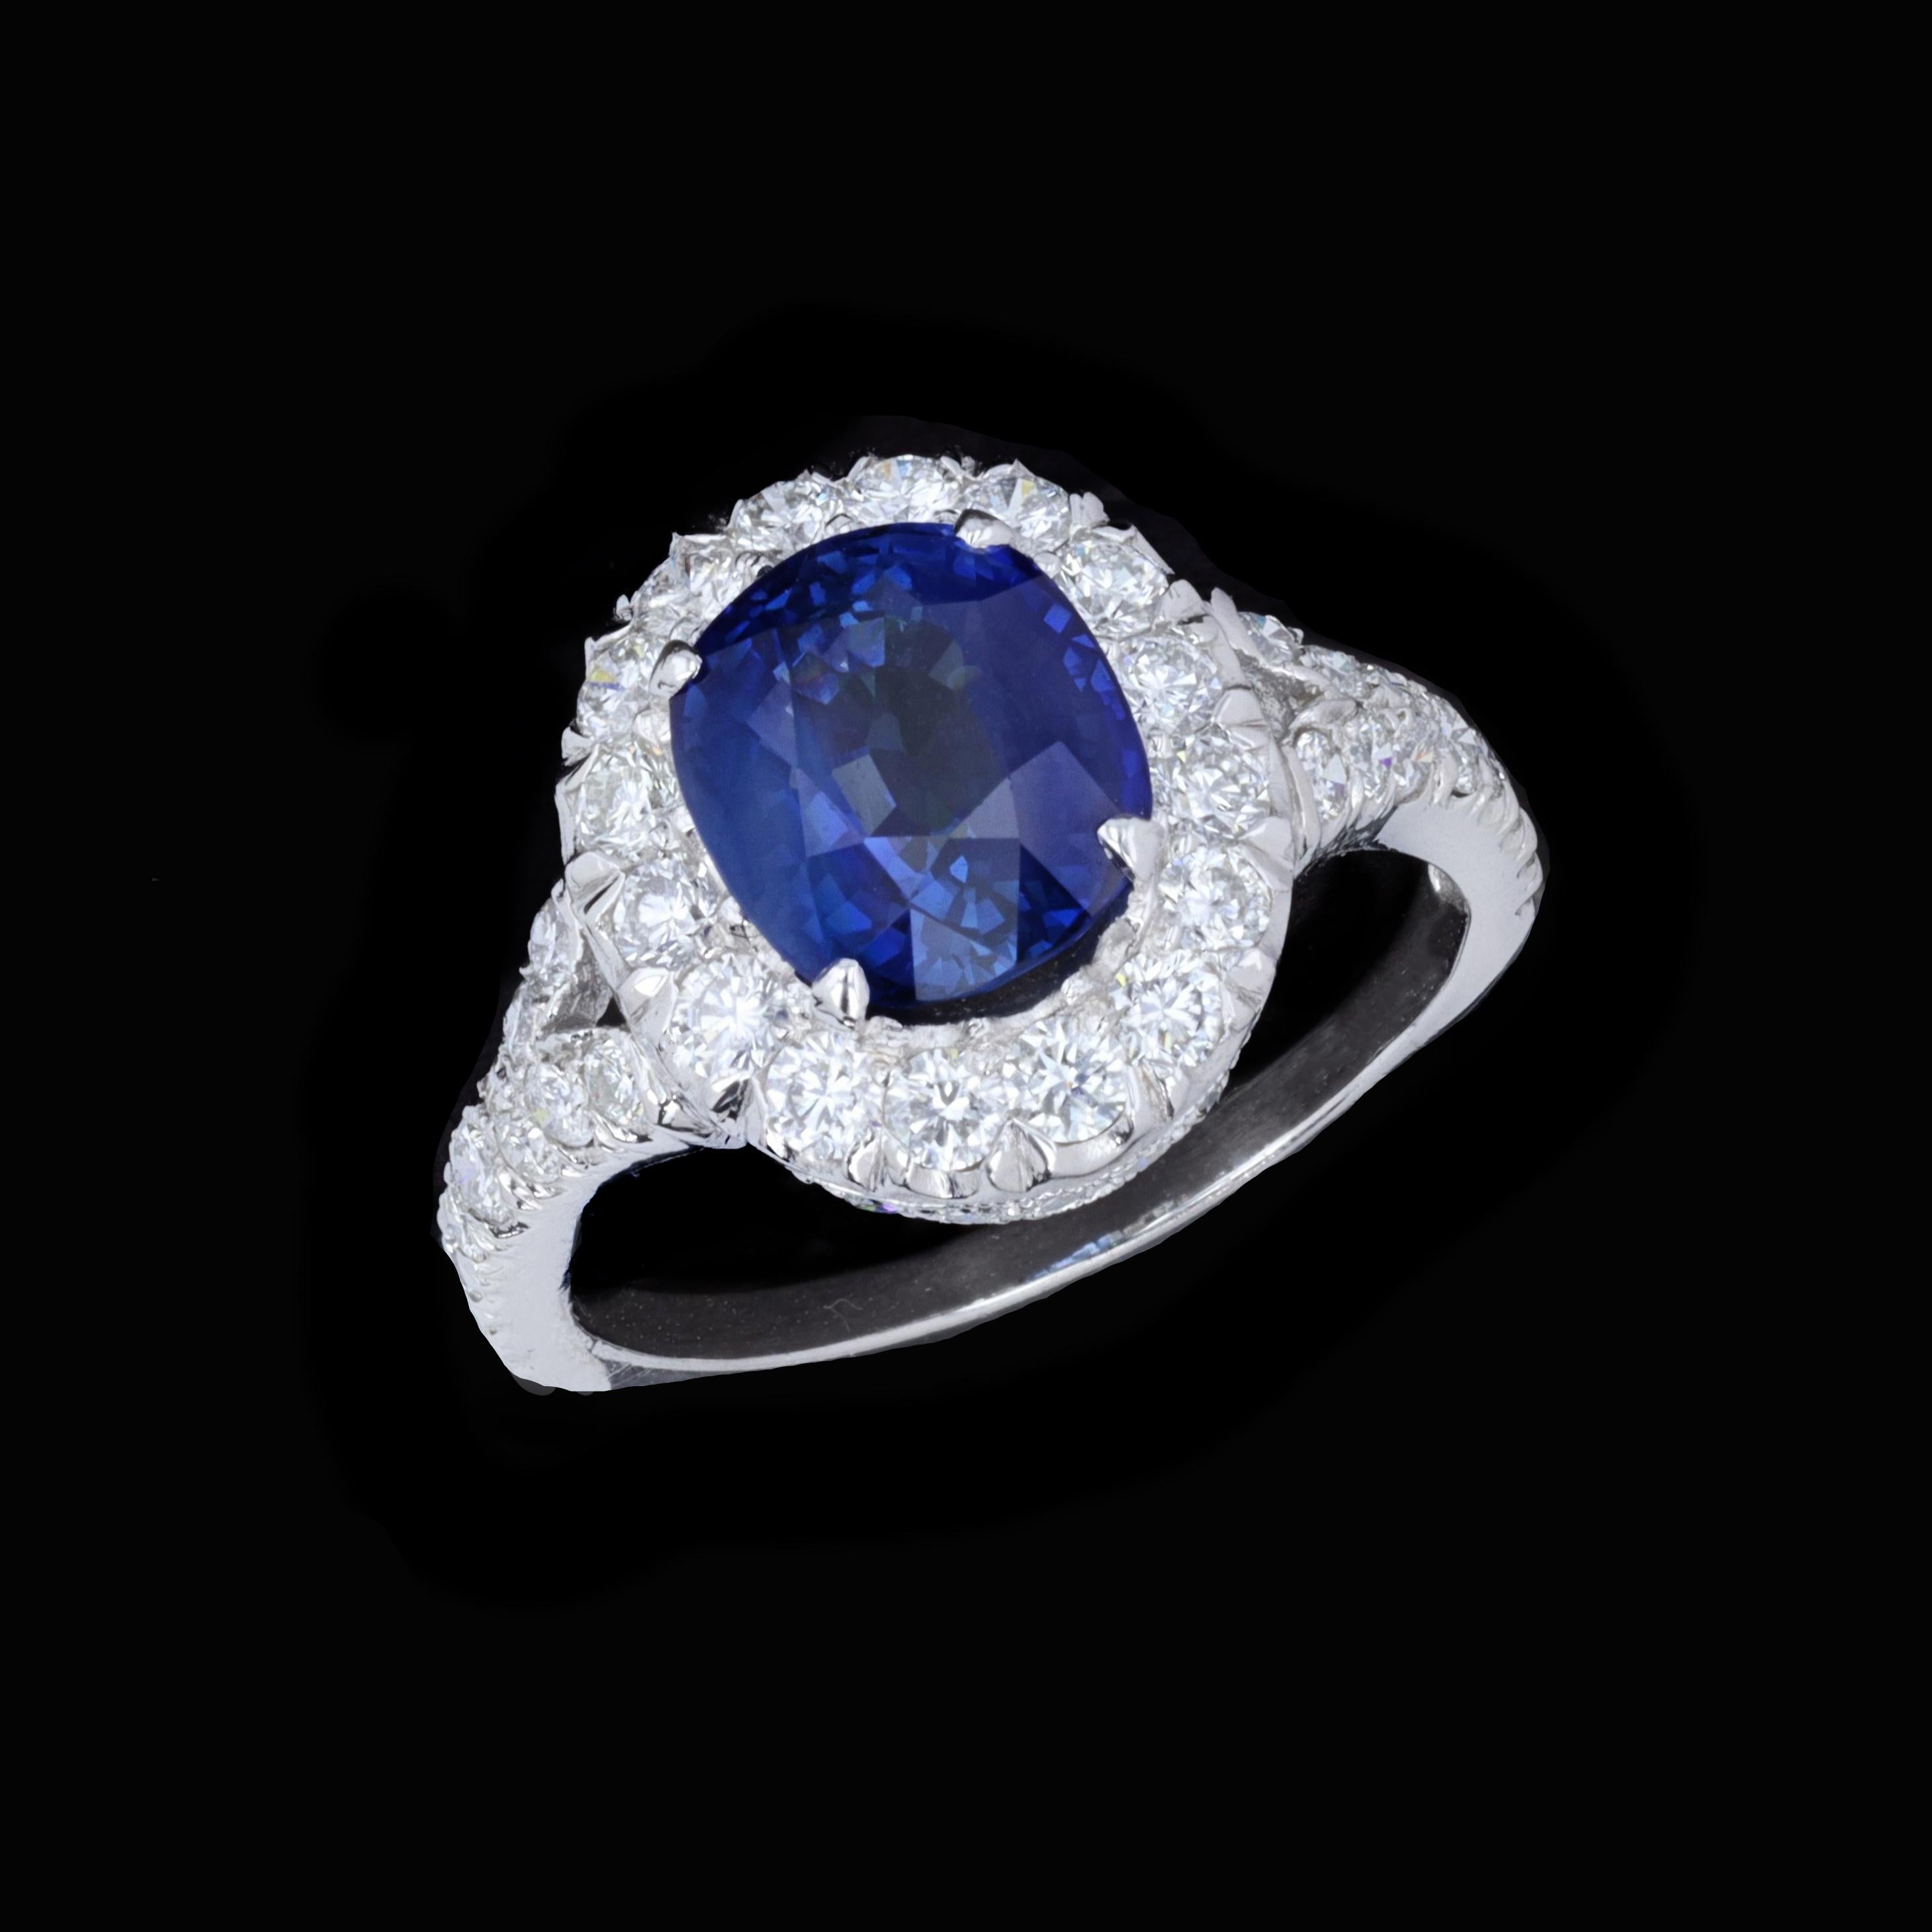 Graceful elegance is surrounded by a glittering circle of glamour in this stunning combination of sapphire and diamonds. This platinum sapphire and diamond halo ring contains one oval cut blue sapphire 3.52 ctw and 56 round brilliant cut diamonds